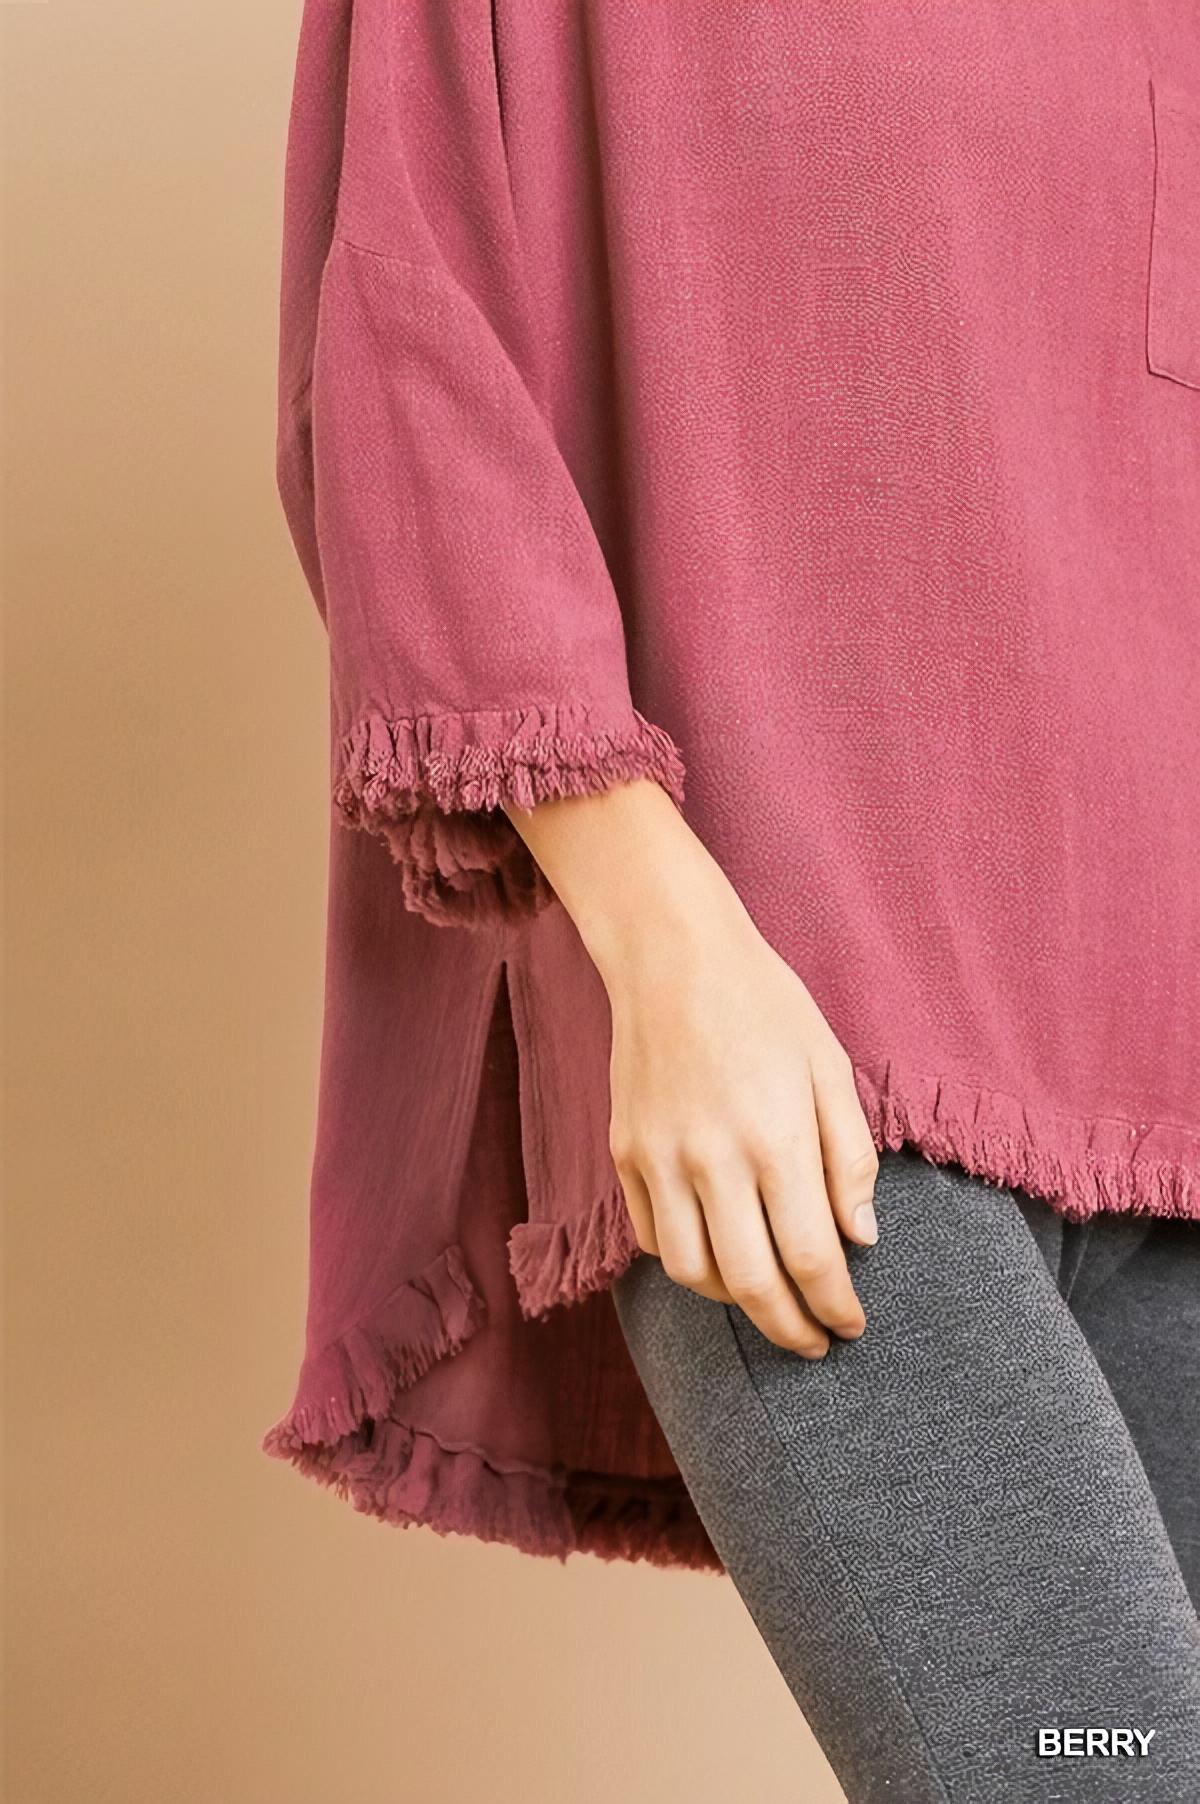 Frayed Hem Top with Long Bell Sleeves and Chest Pocket by Umgee Clothing